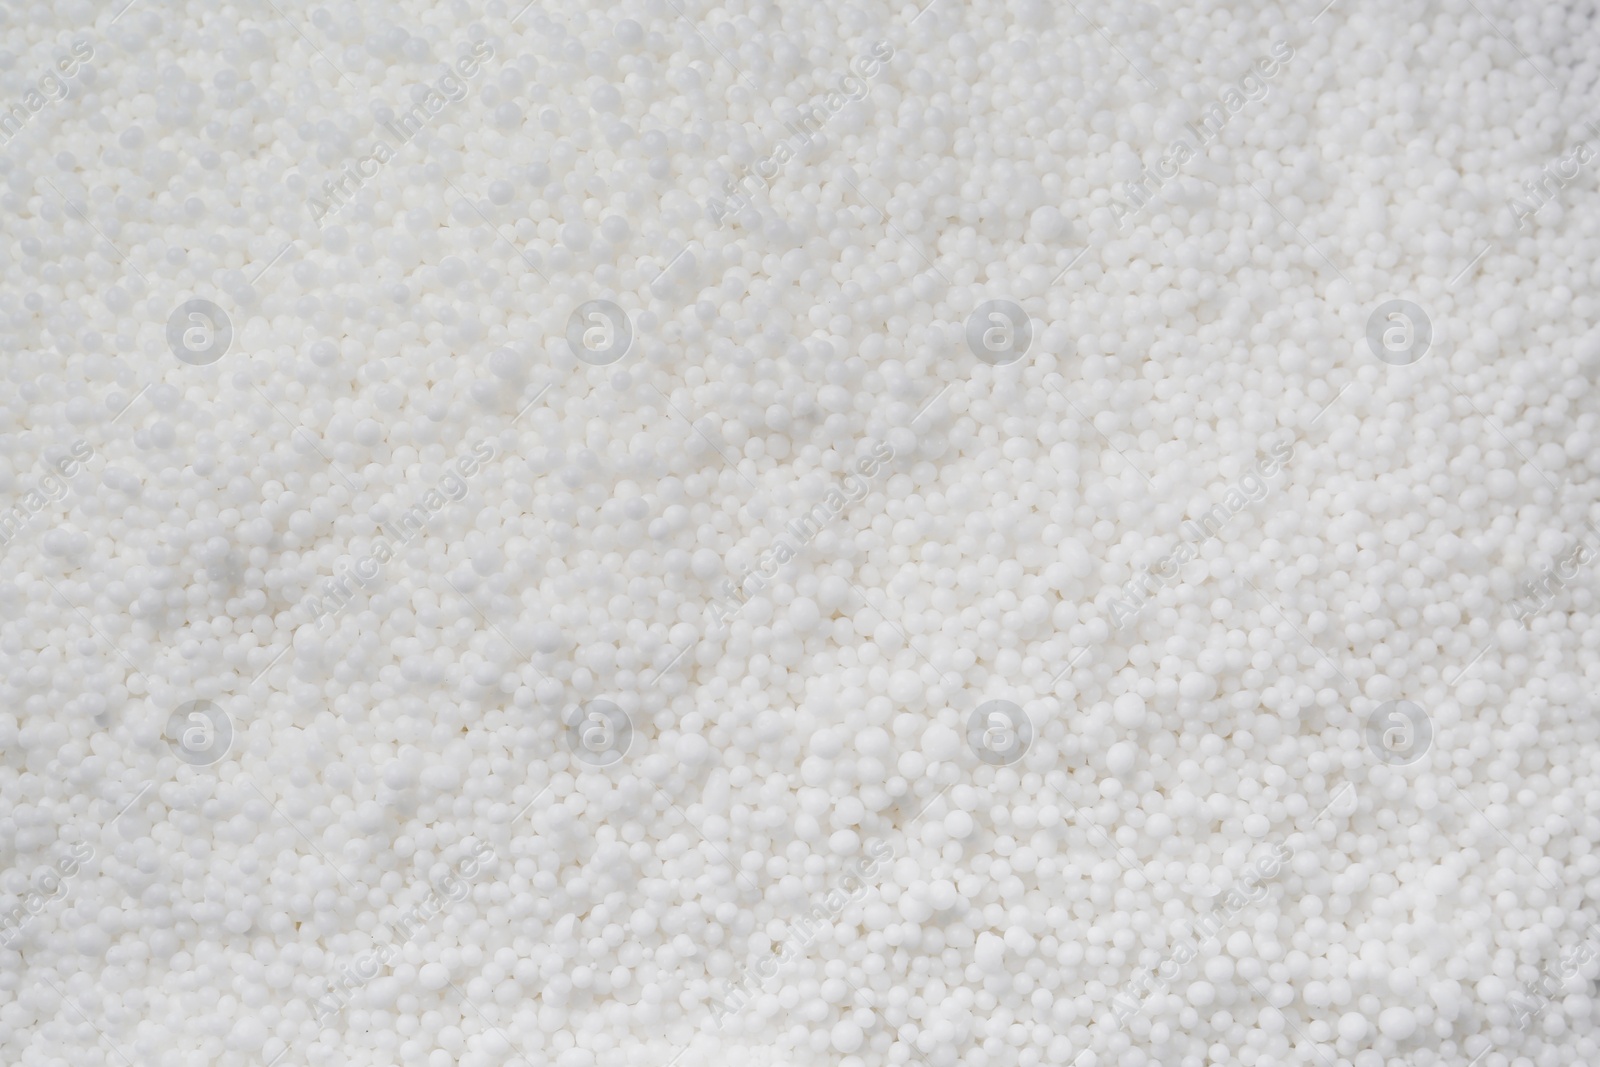 Photo of Granular mineral fertilizer as background, closeup view